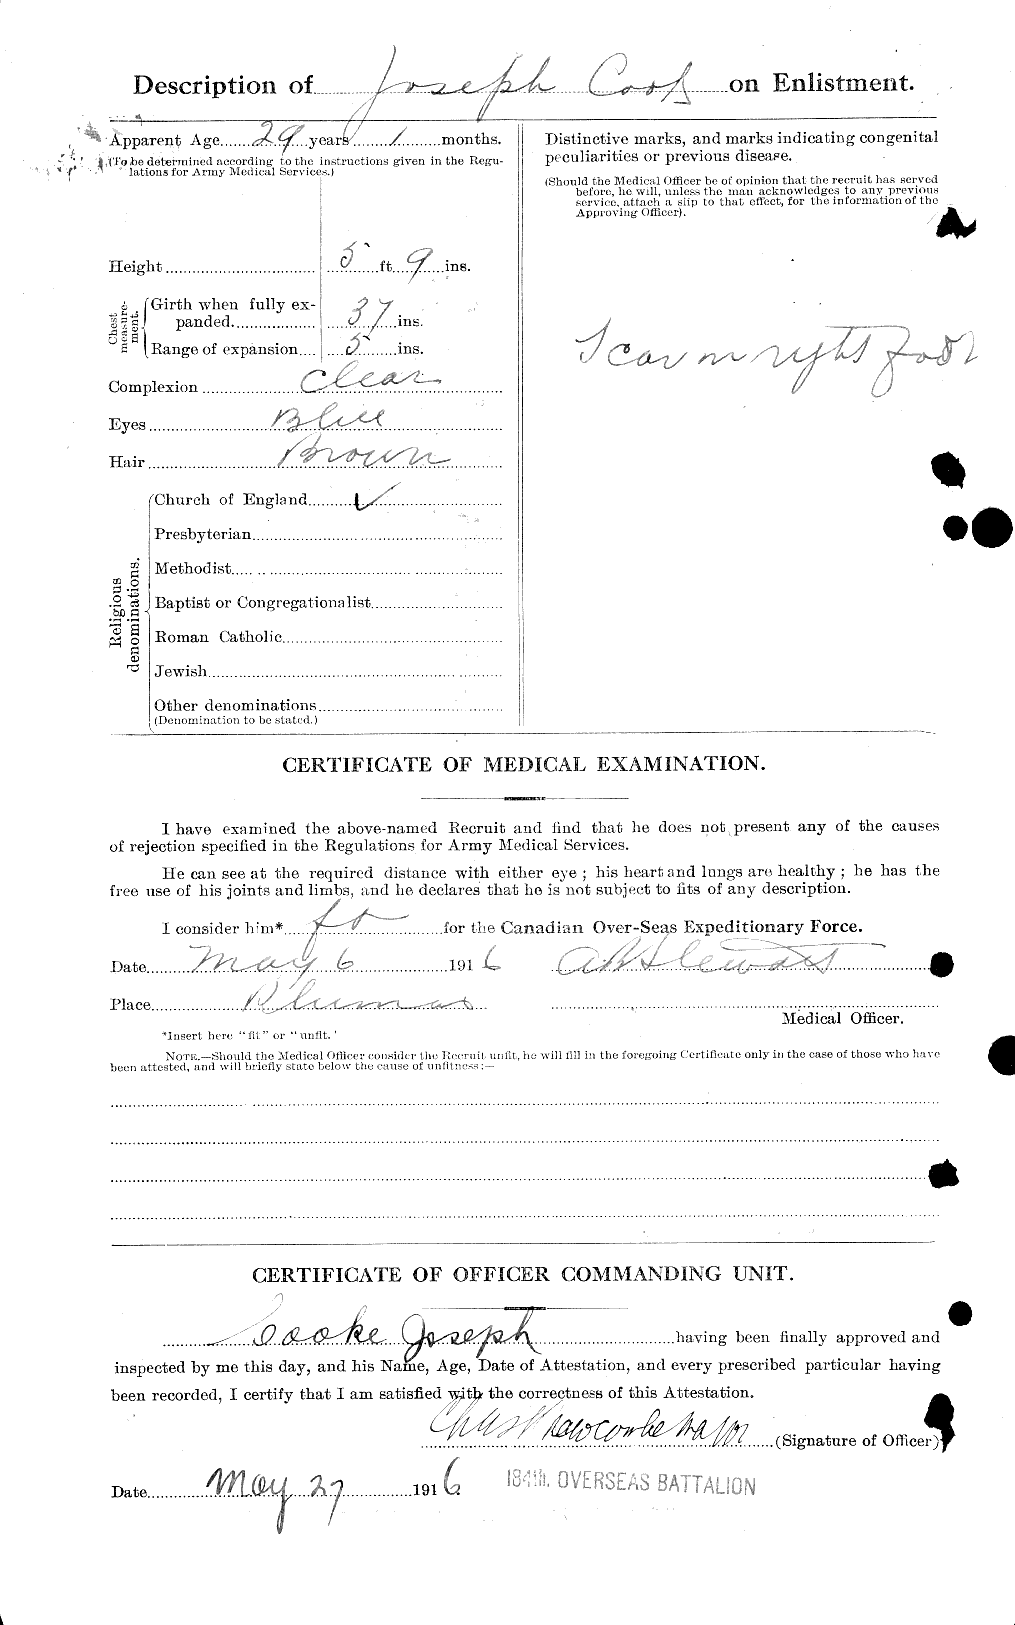 Personnel Records of the First World War - CEF 048928b